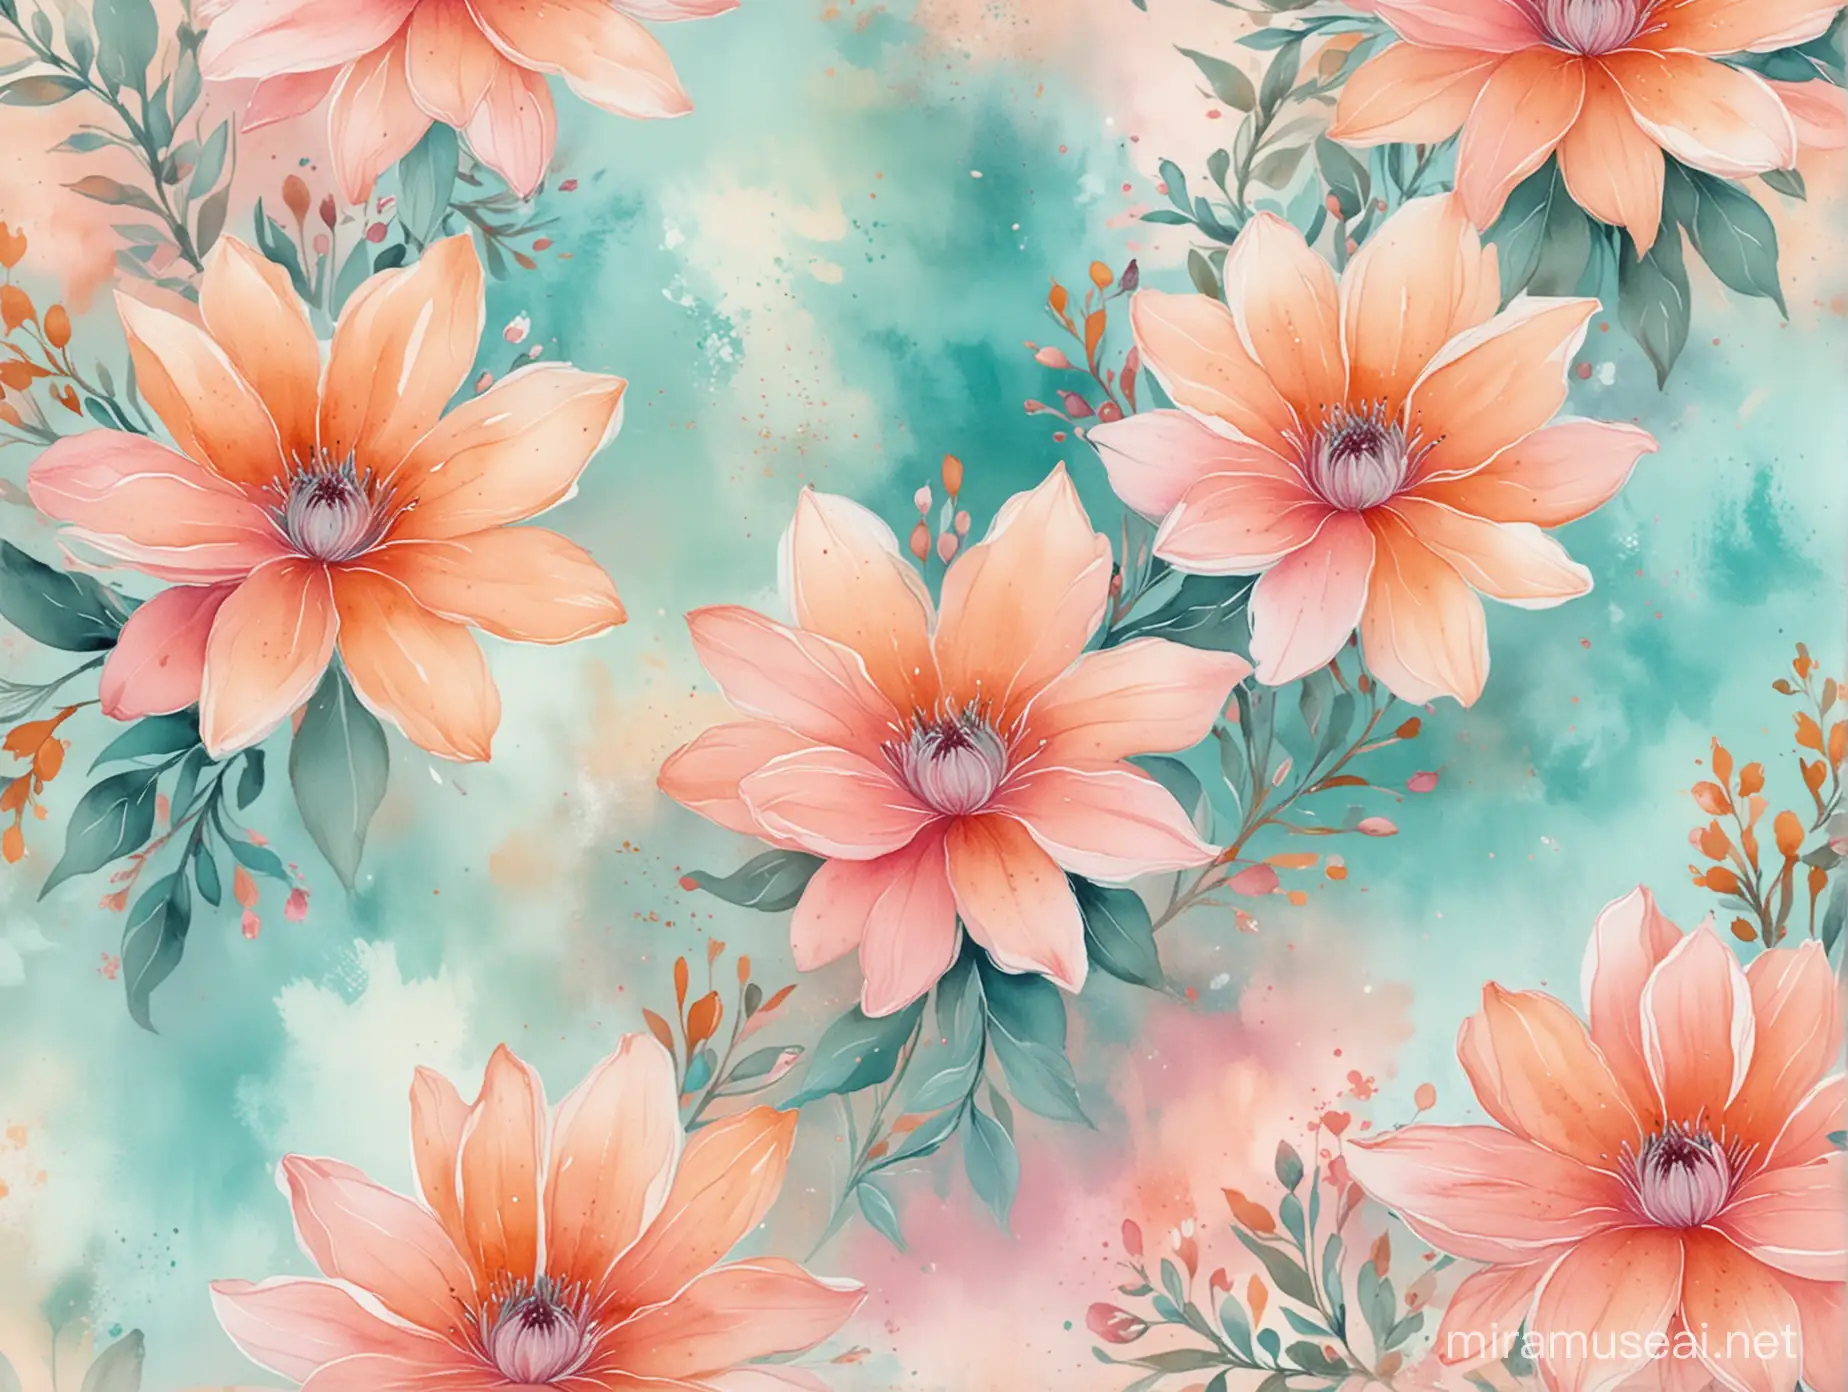 pink orange and teal floral smuged watercolor on a pastel background